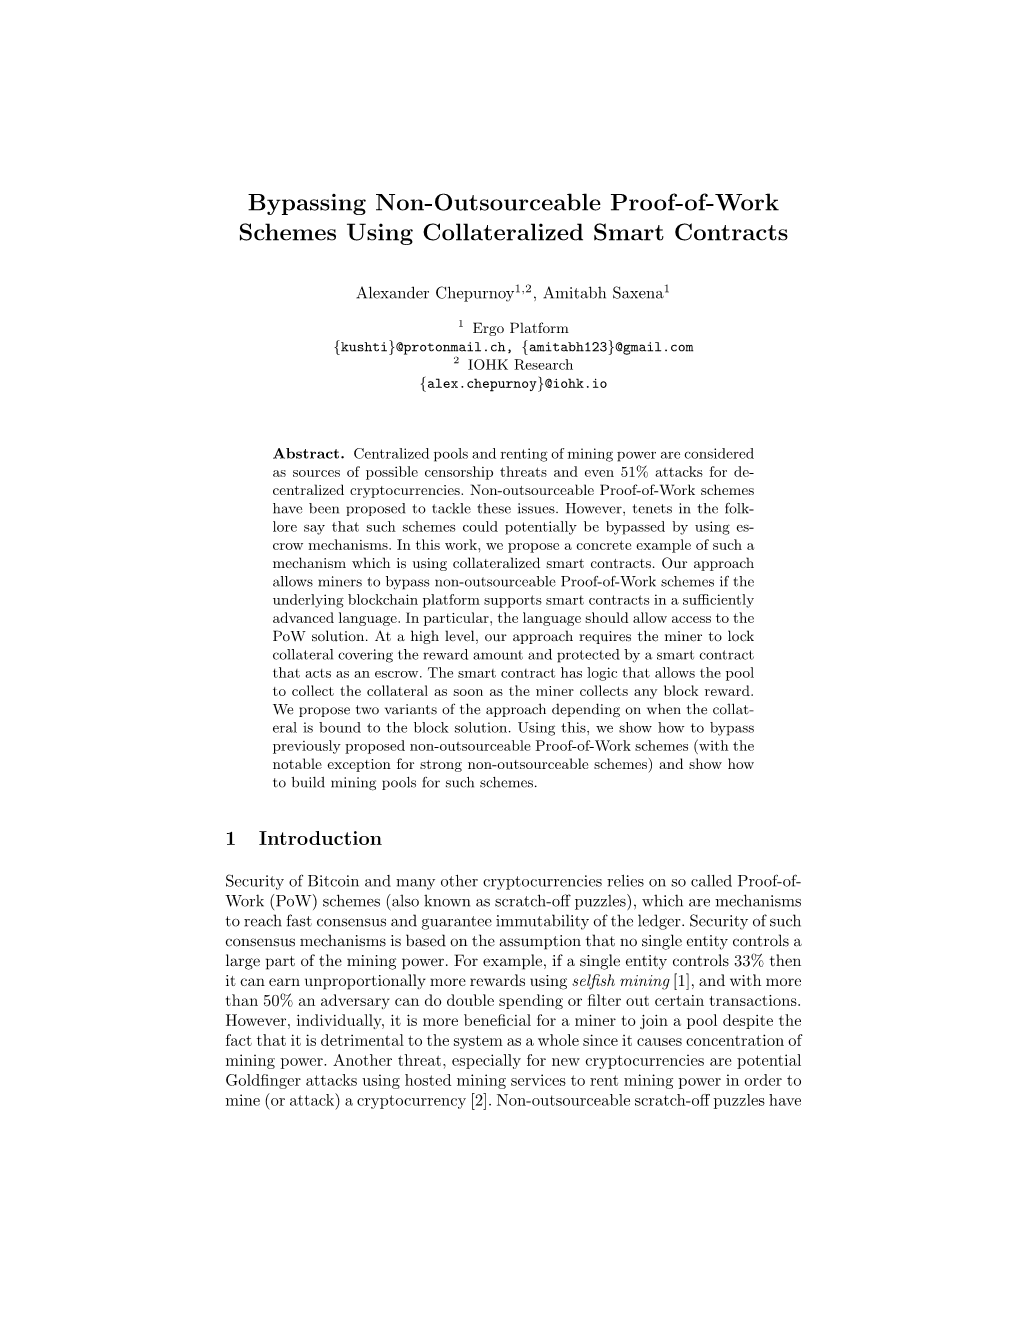 Bypassing Non-Outsourceable Proof-Of-Work Schemes Using Collateralized Smart Contracts